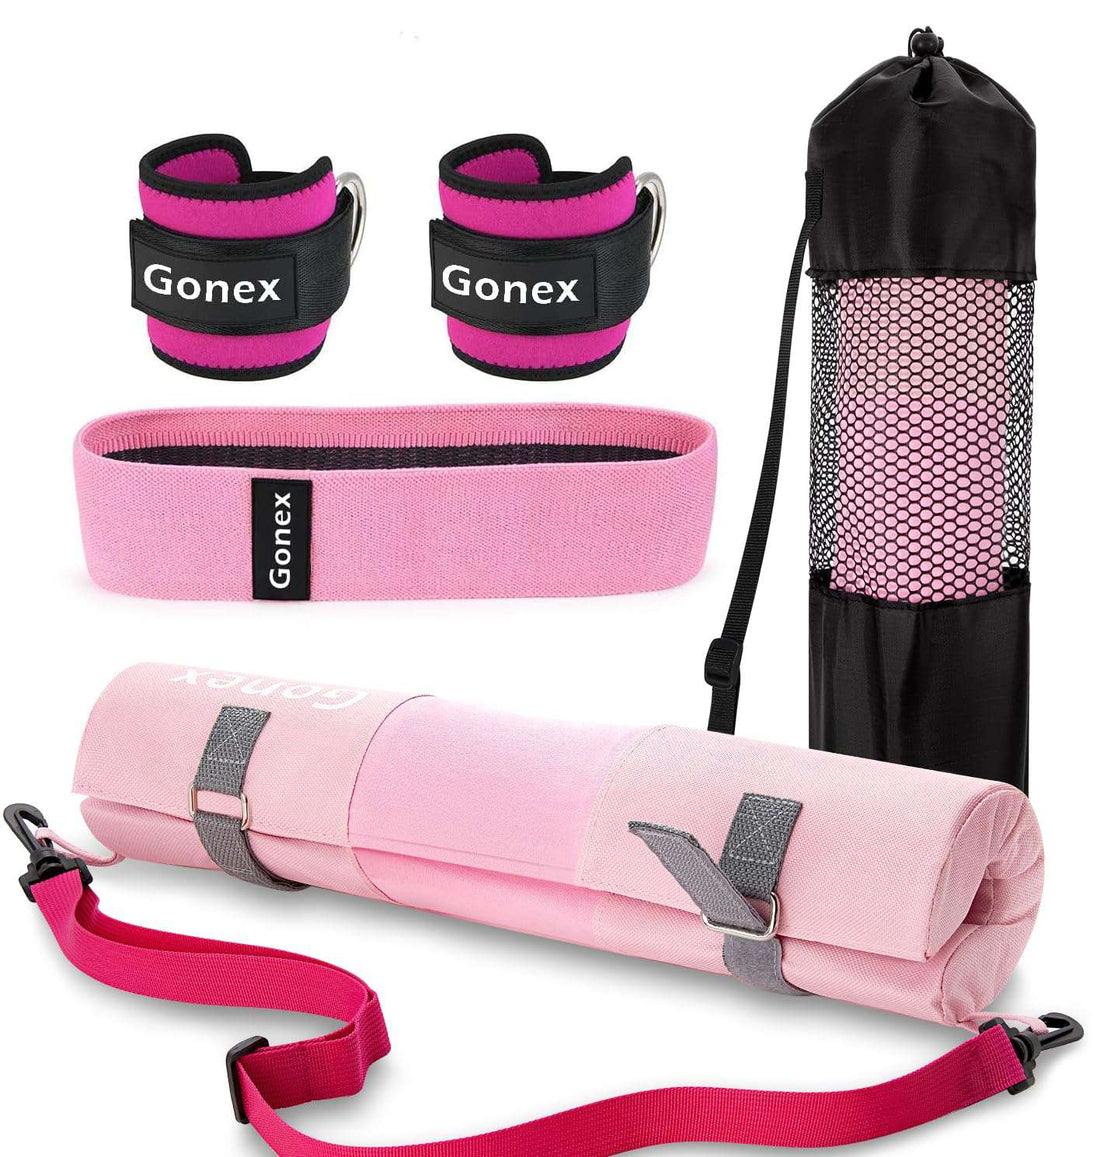 Build Your Home and Outdoor Gym with Gonex Fitness Equipment